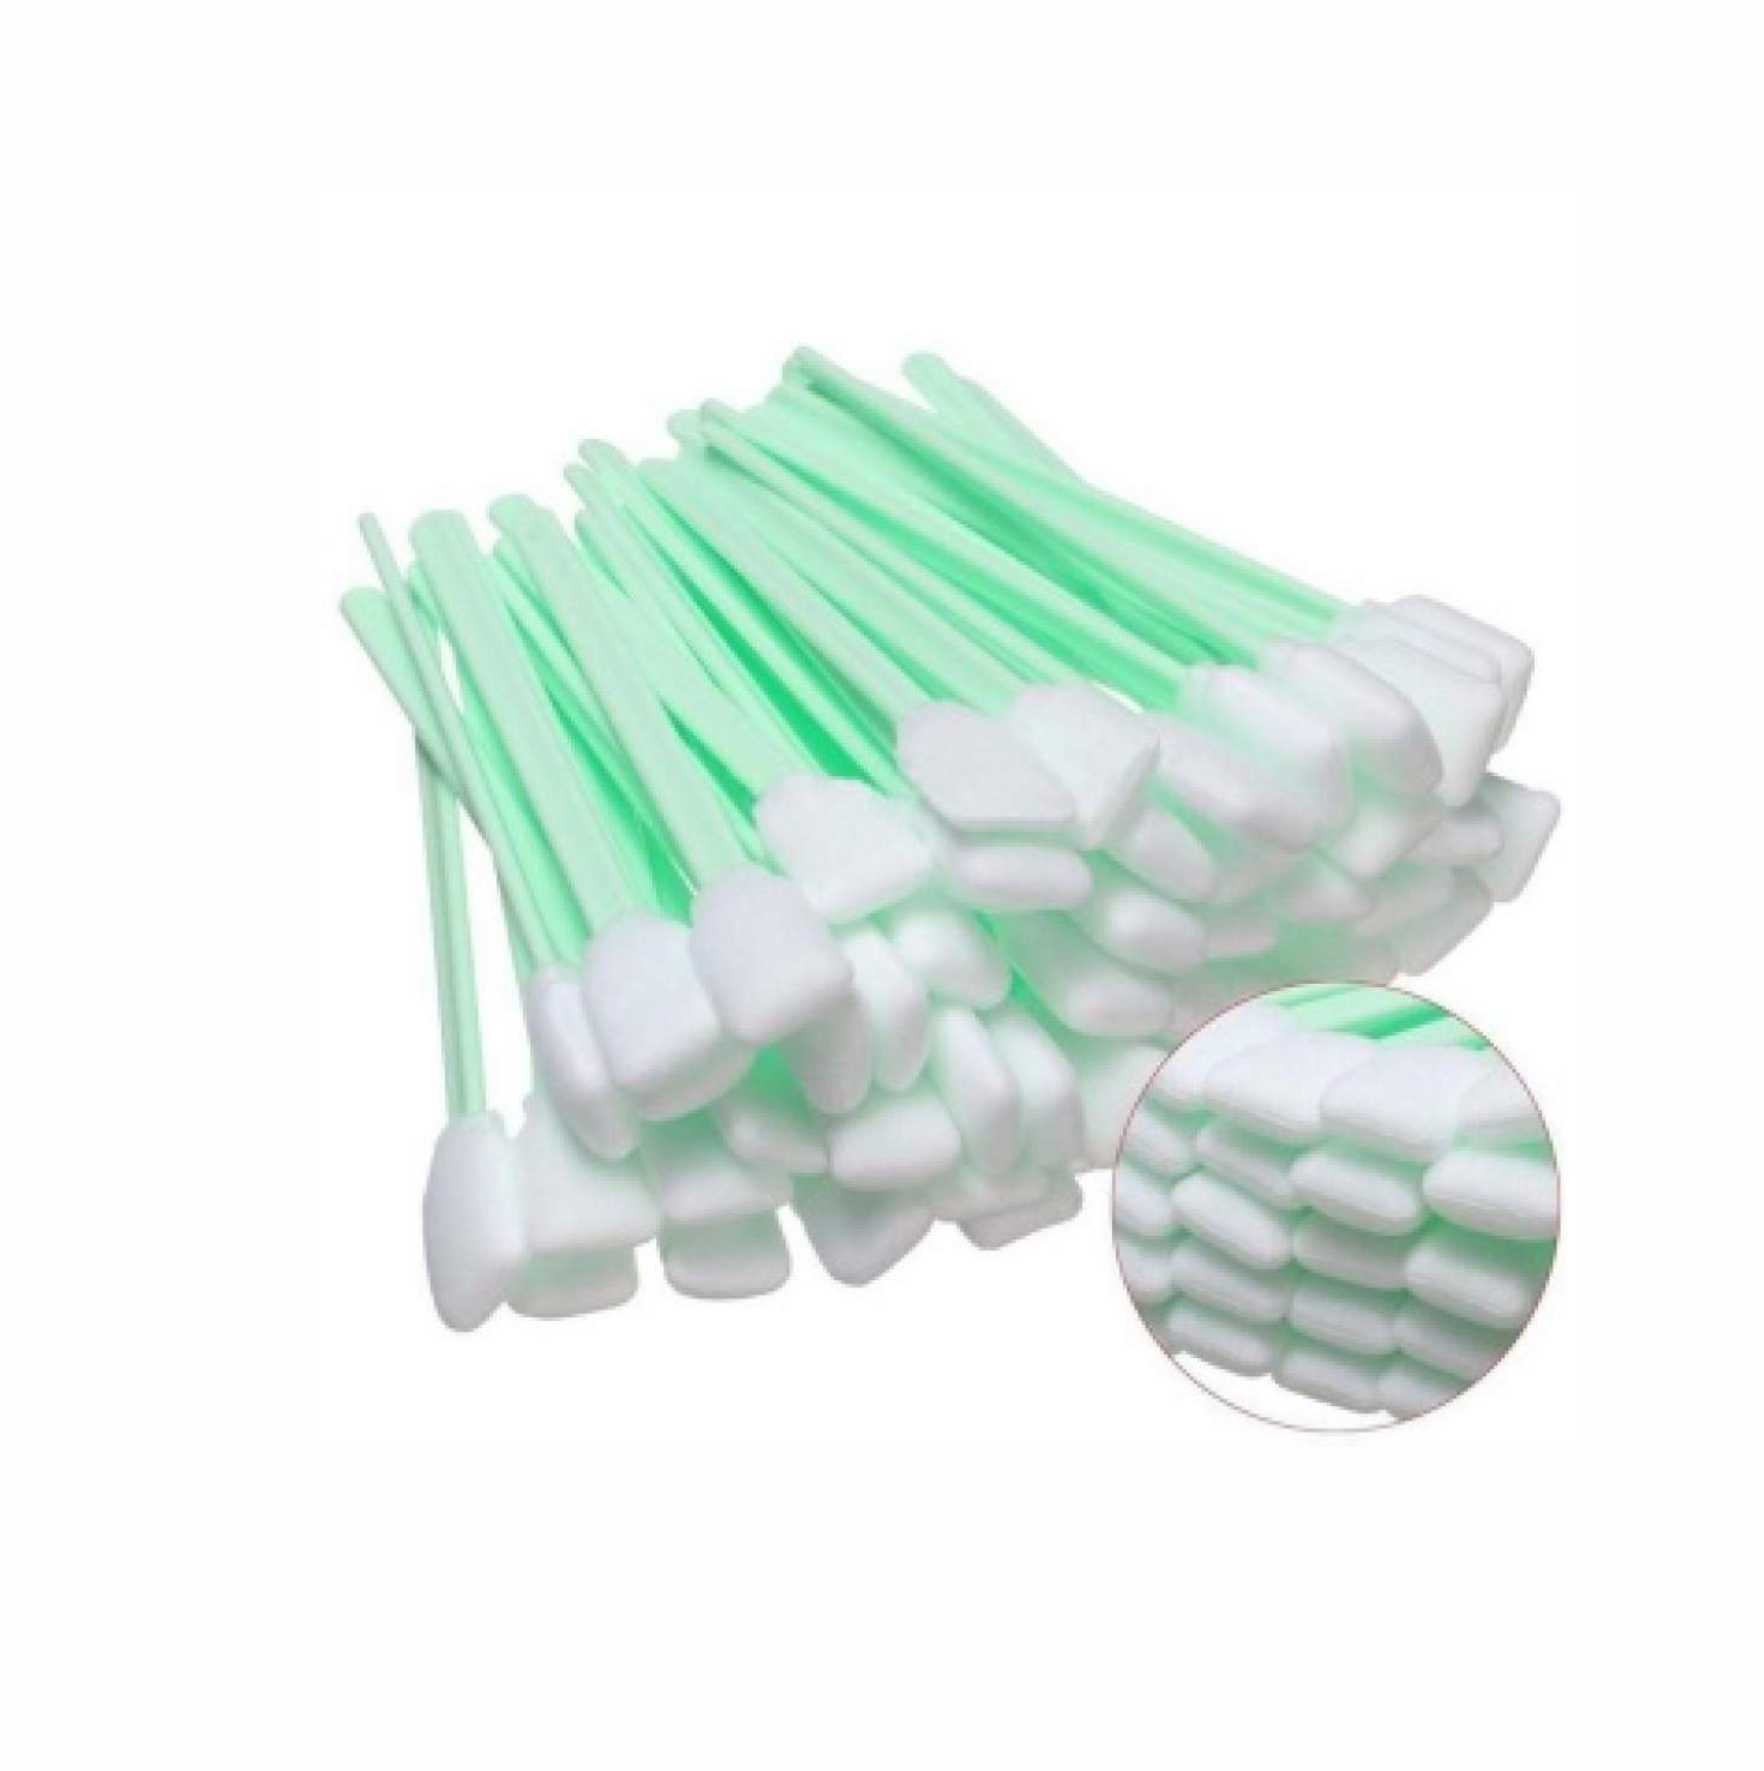 Roland Inkjet Printers 5" Long US Stock 300 PCS Foam Cleaning Swabs for Epson 